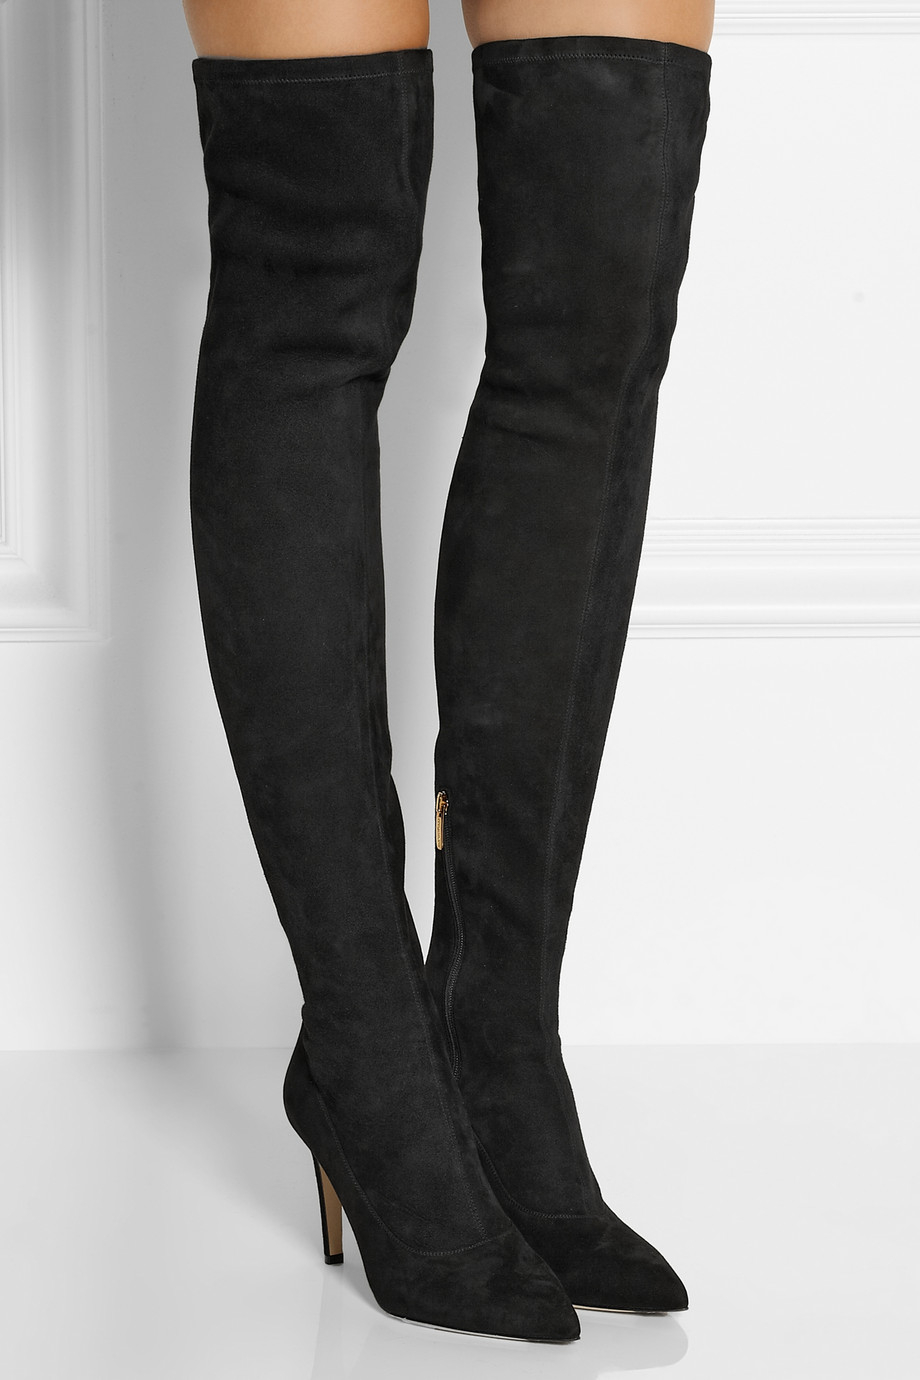 Sergio Rossi Stretch-Suede Over-The-Knee Boots in Black - Lyst